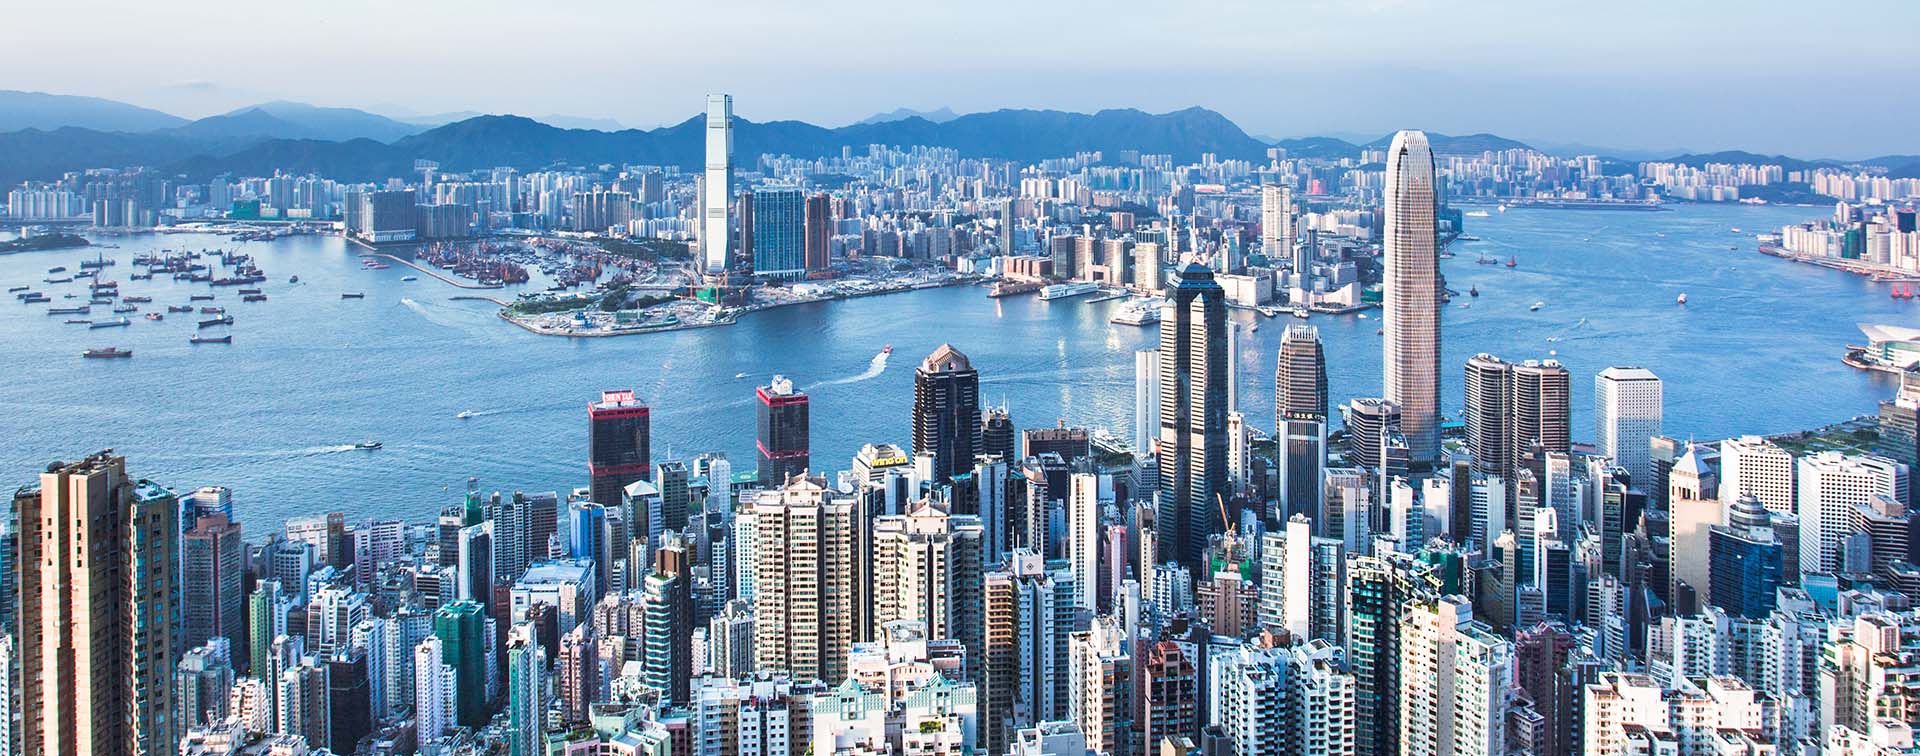 Aerial view of Hong Kong’s skyline, split by a large body of water, with a mountain range in the background